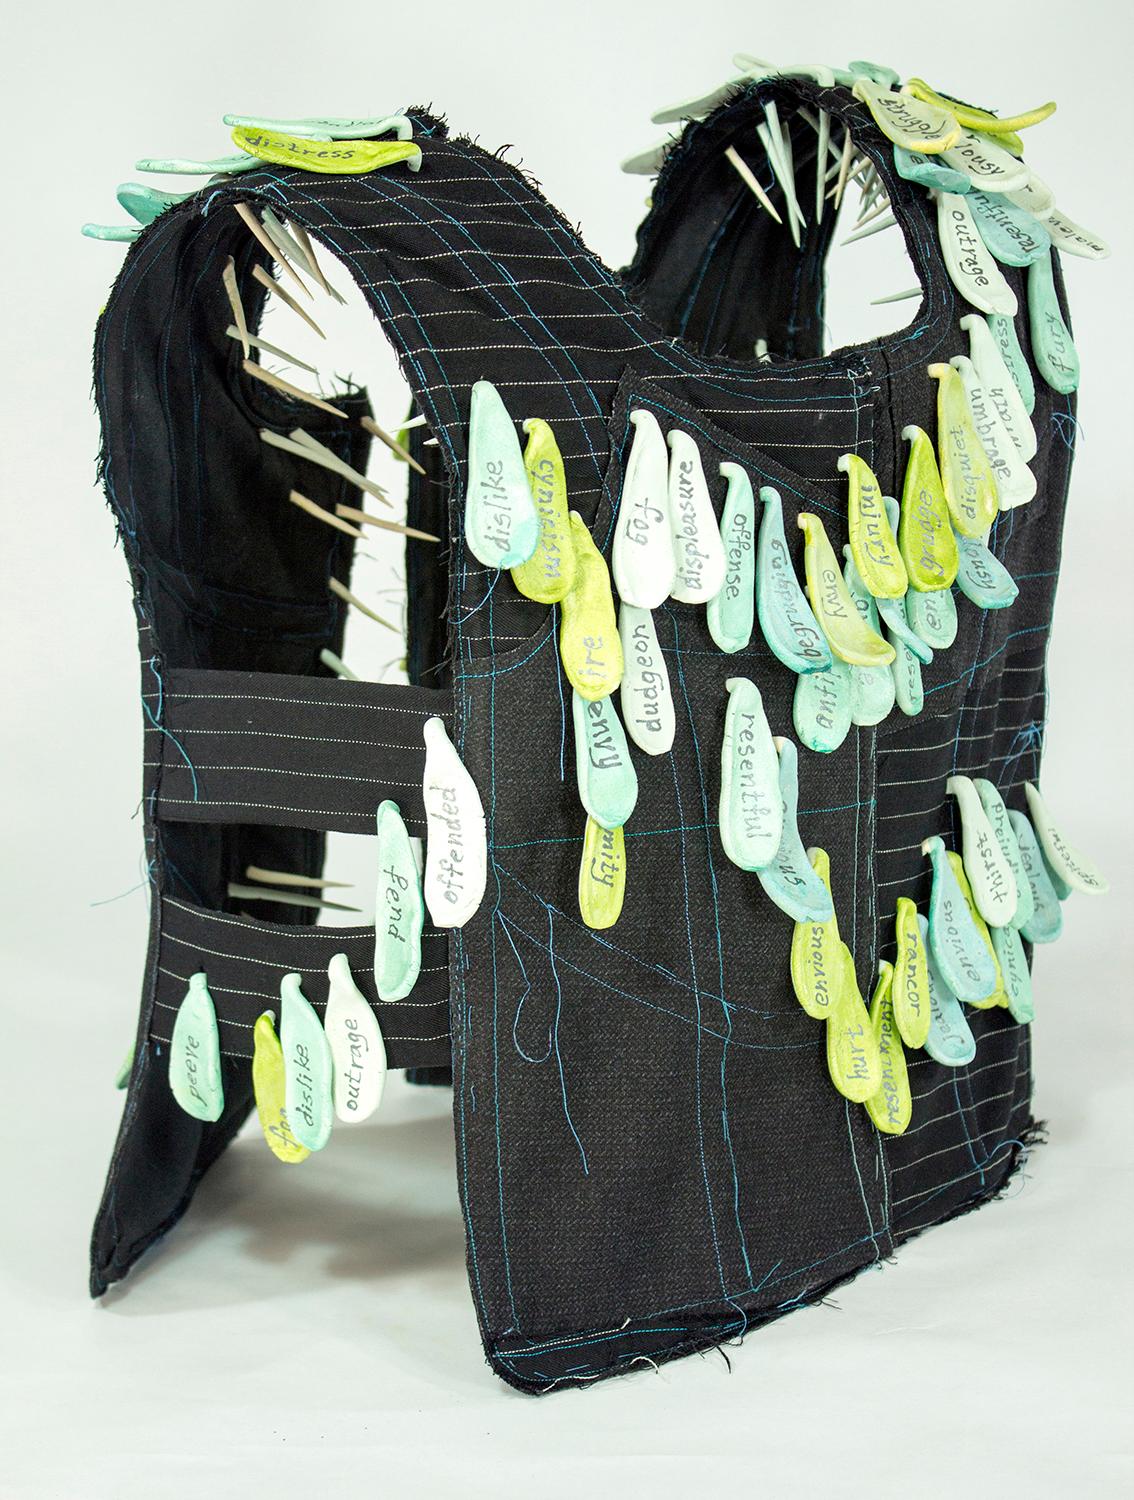 Virginia Mahoney’s “Envy” is a mixed-media sculpture in vest form that is black with white pinstripes, and has attached ceramic tags in various shades of green, on which words referring to being envious are handwritten. Ceramic spikes projecting